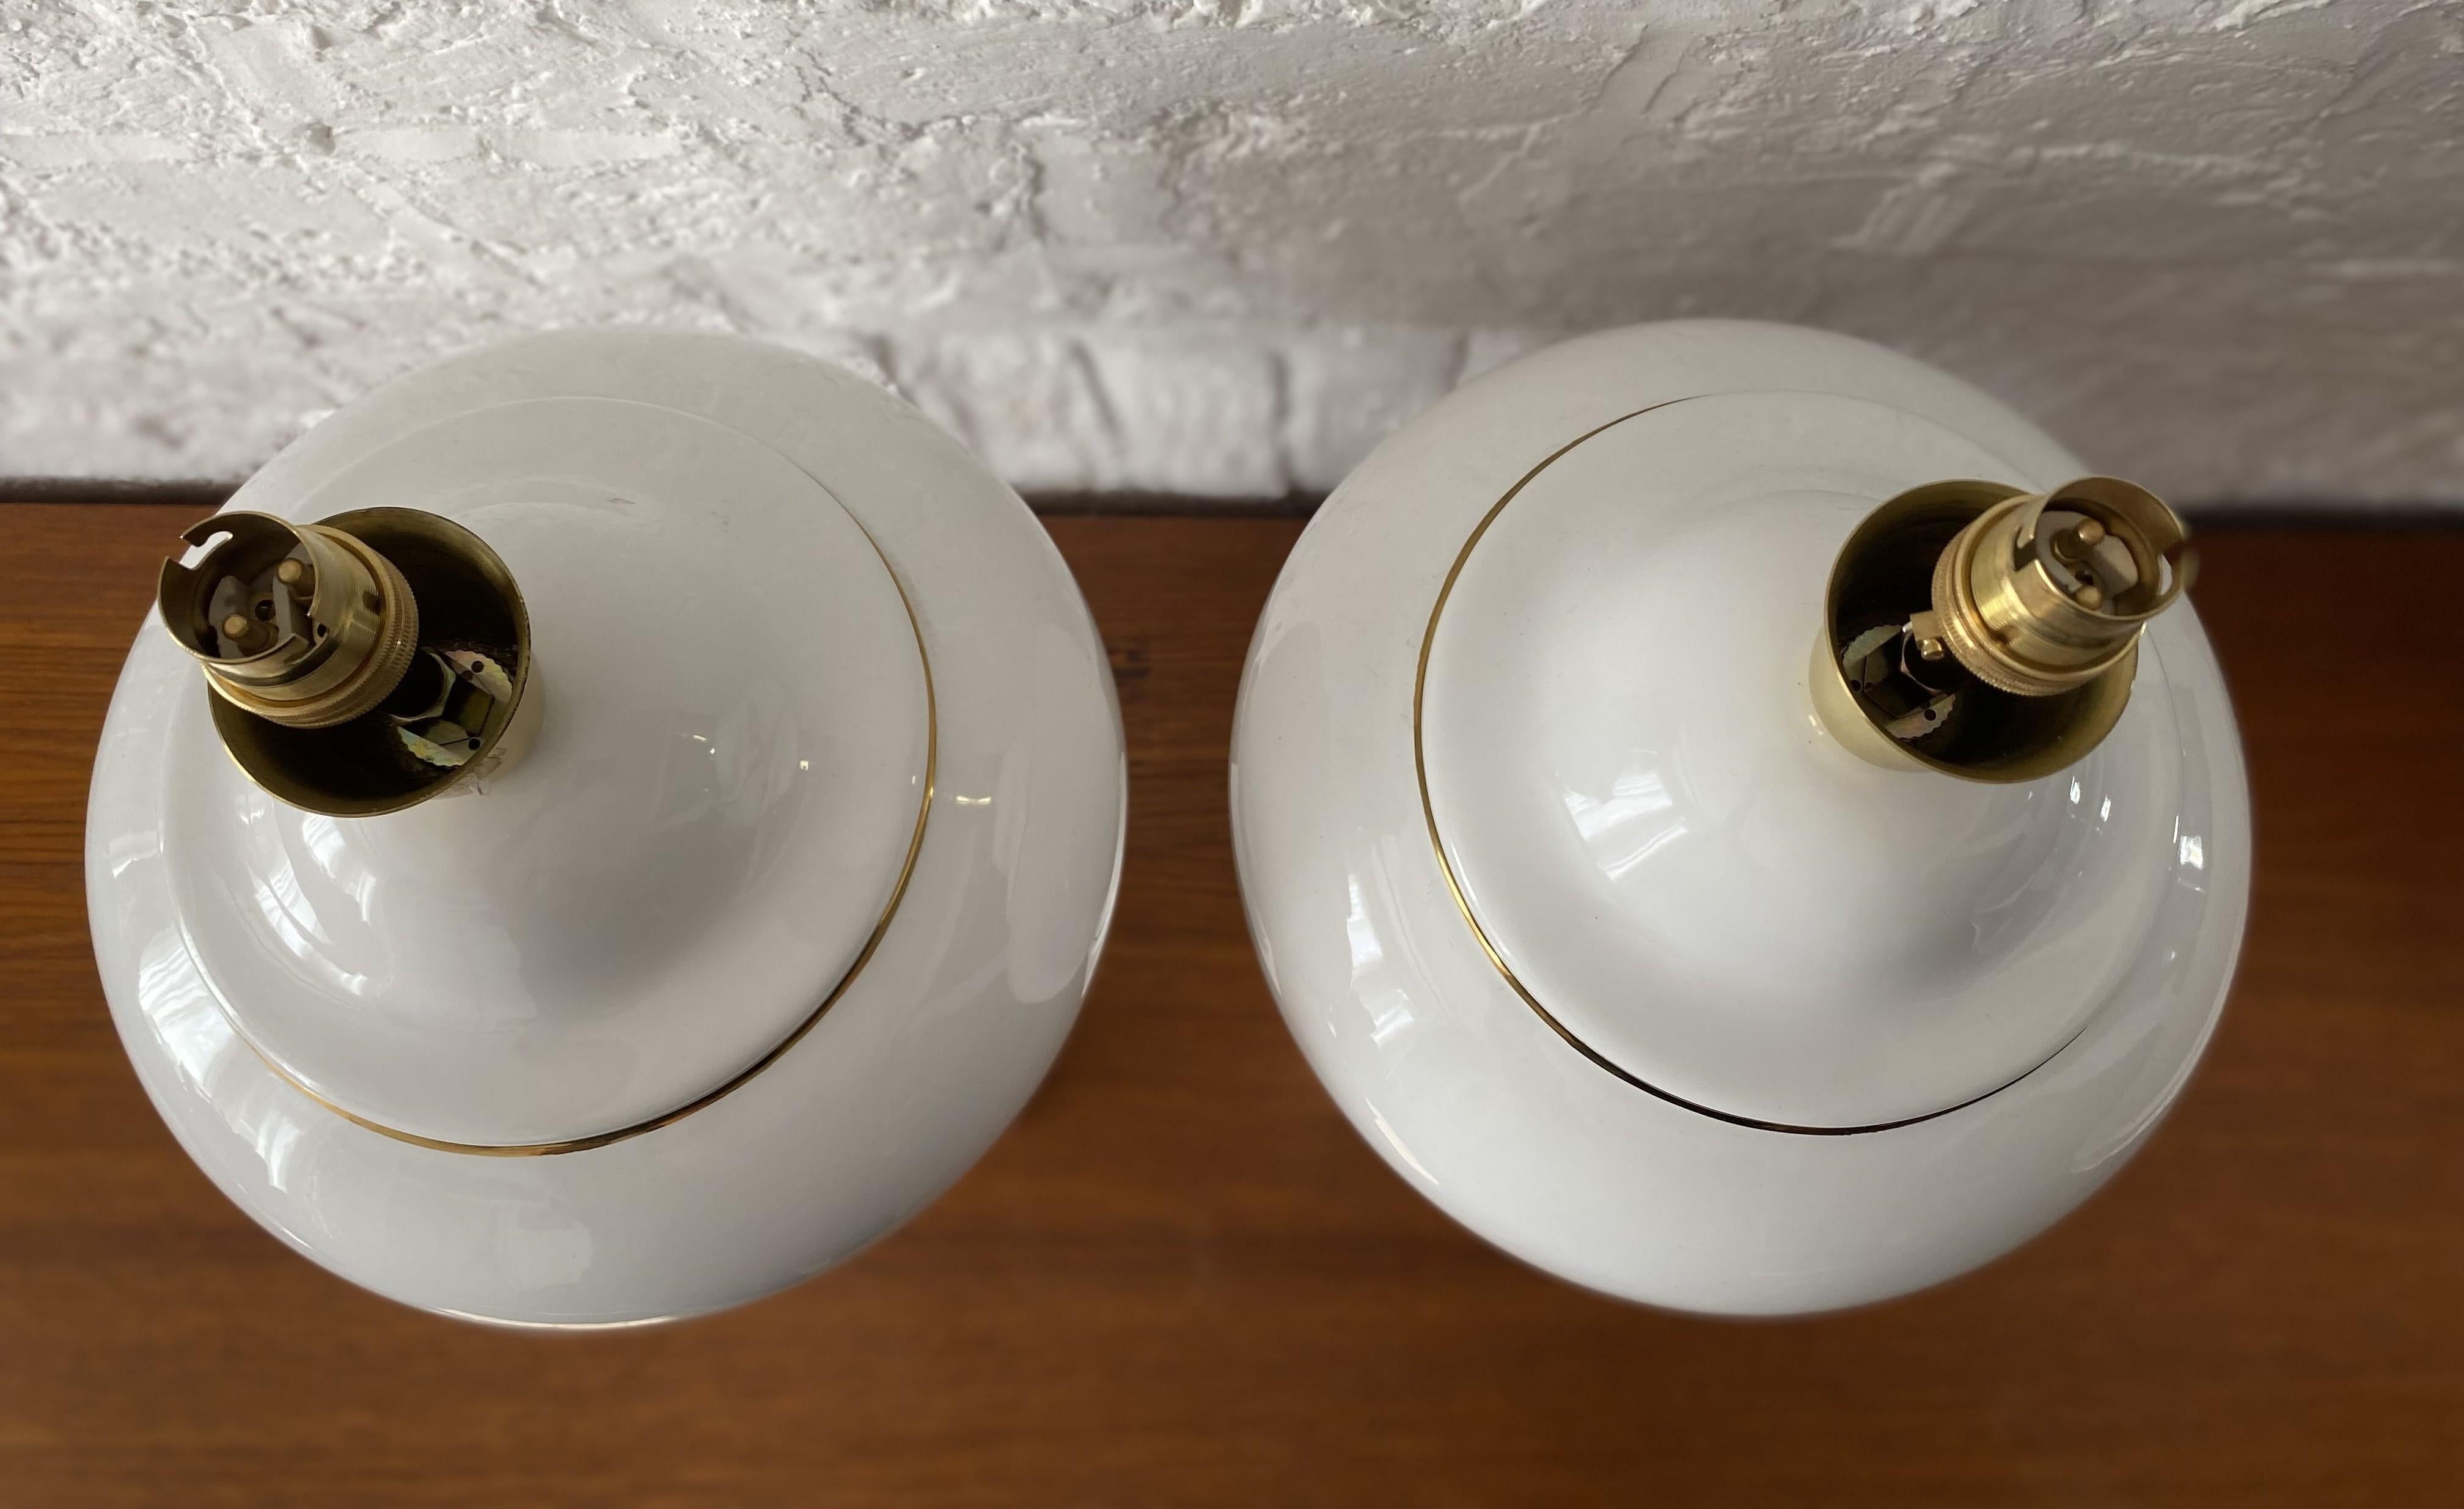 Pair of White & Gold Ceramic Table Lamps & Shades by Stefano Cevoli, 1980s For Sale 3